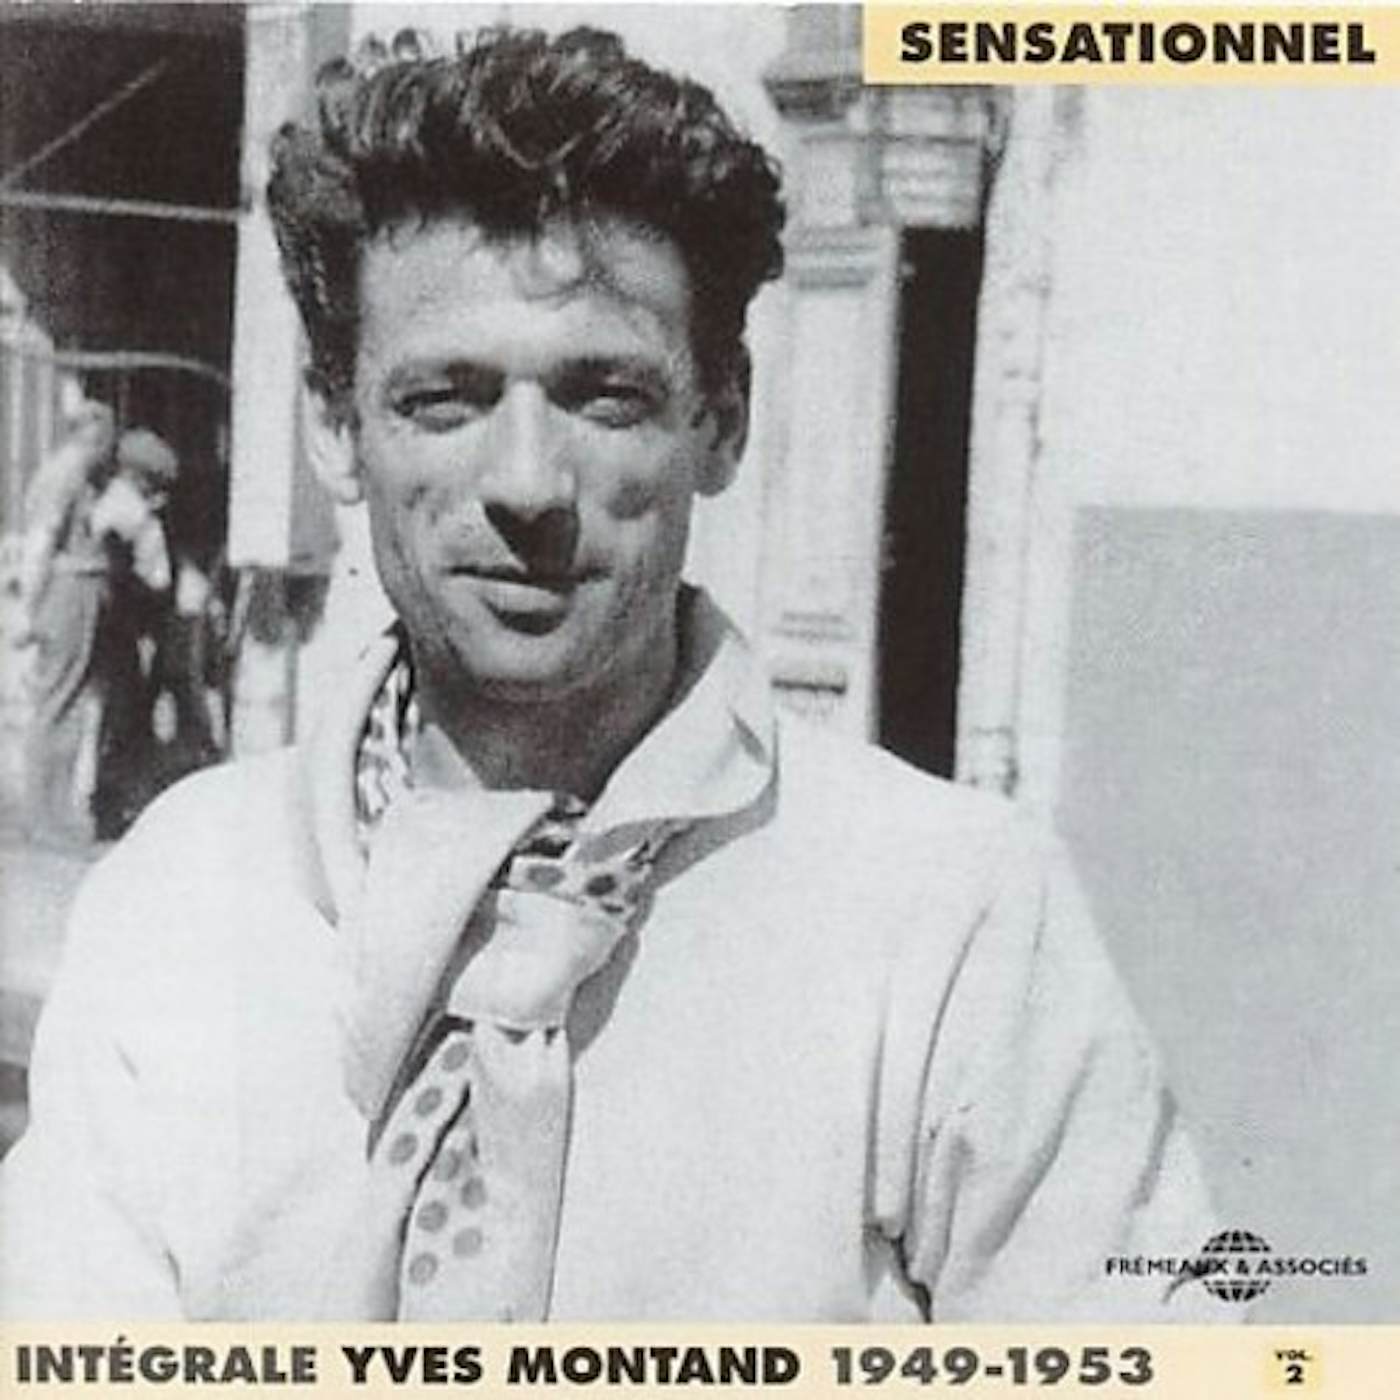 Yves Montand COMPLETE 2: SENSATIONNEL 1949-1953 CD